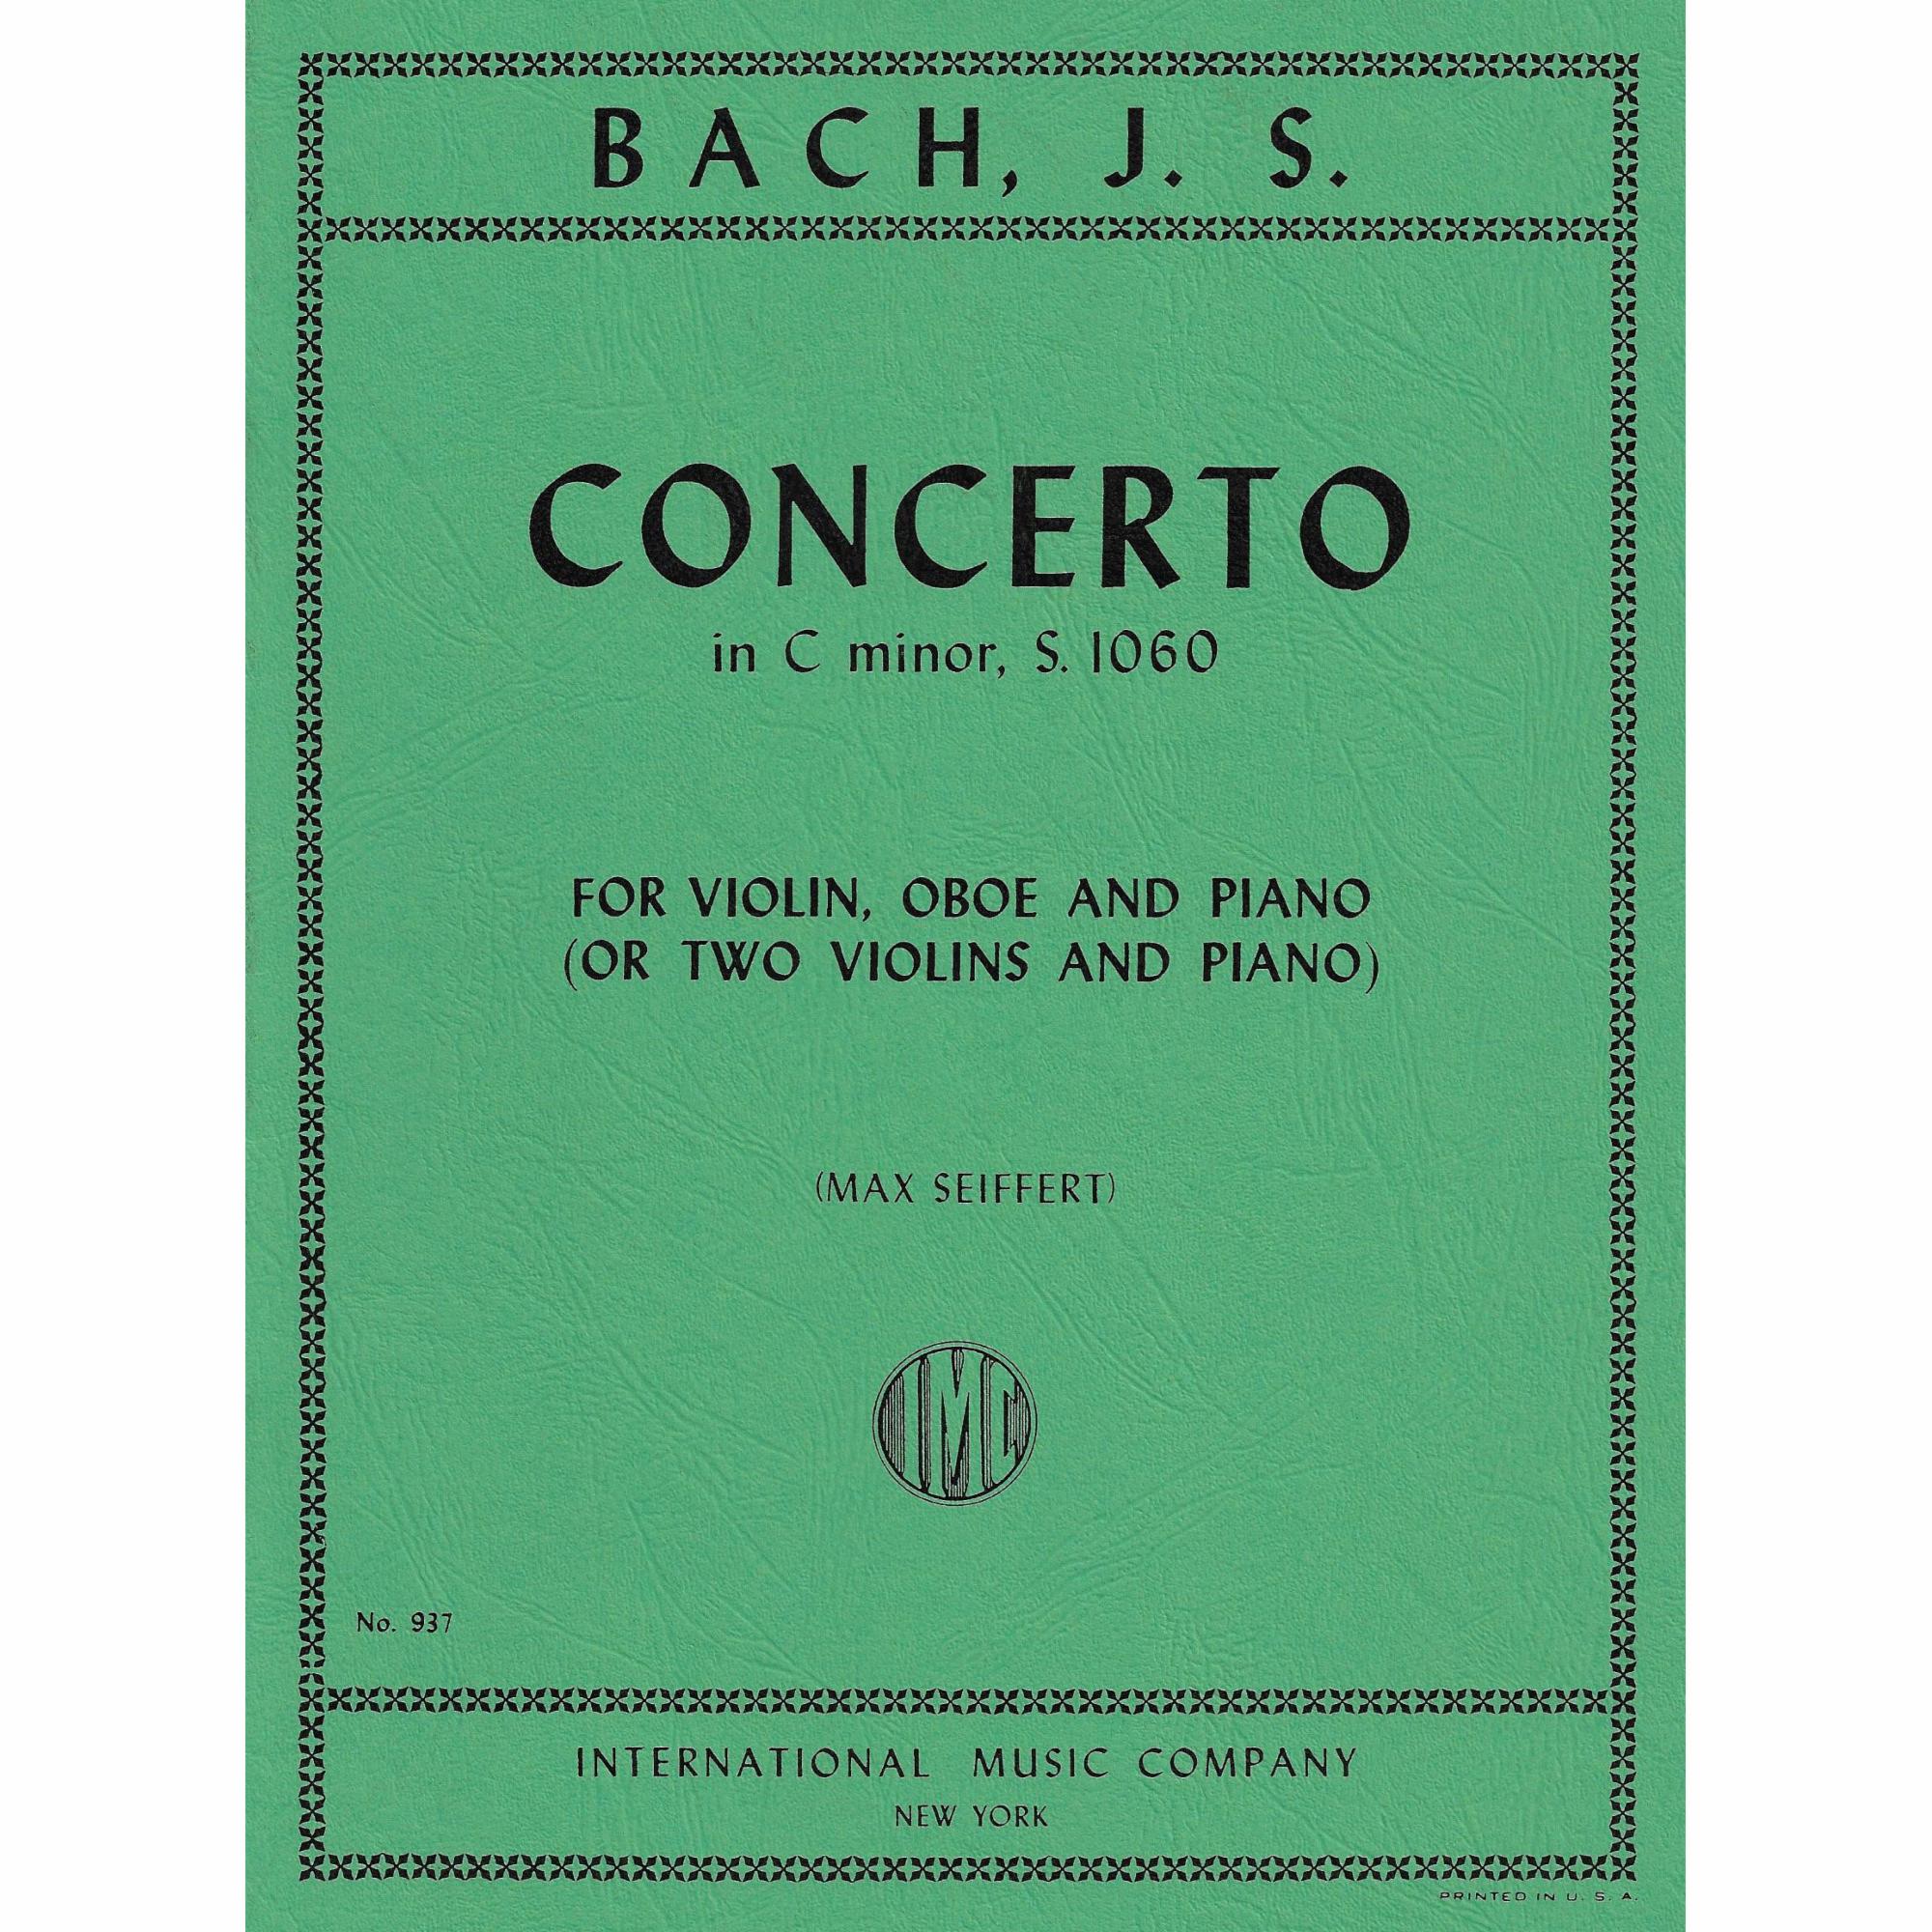 Bach -- Concerto in C Minor, S. 1060 for Two Violins and Piano